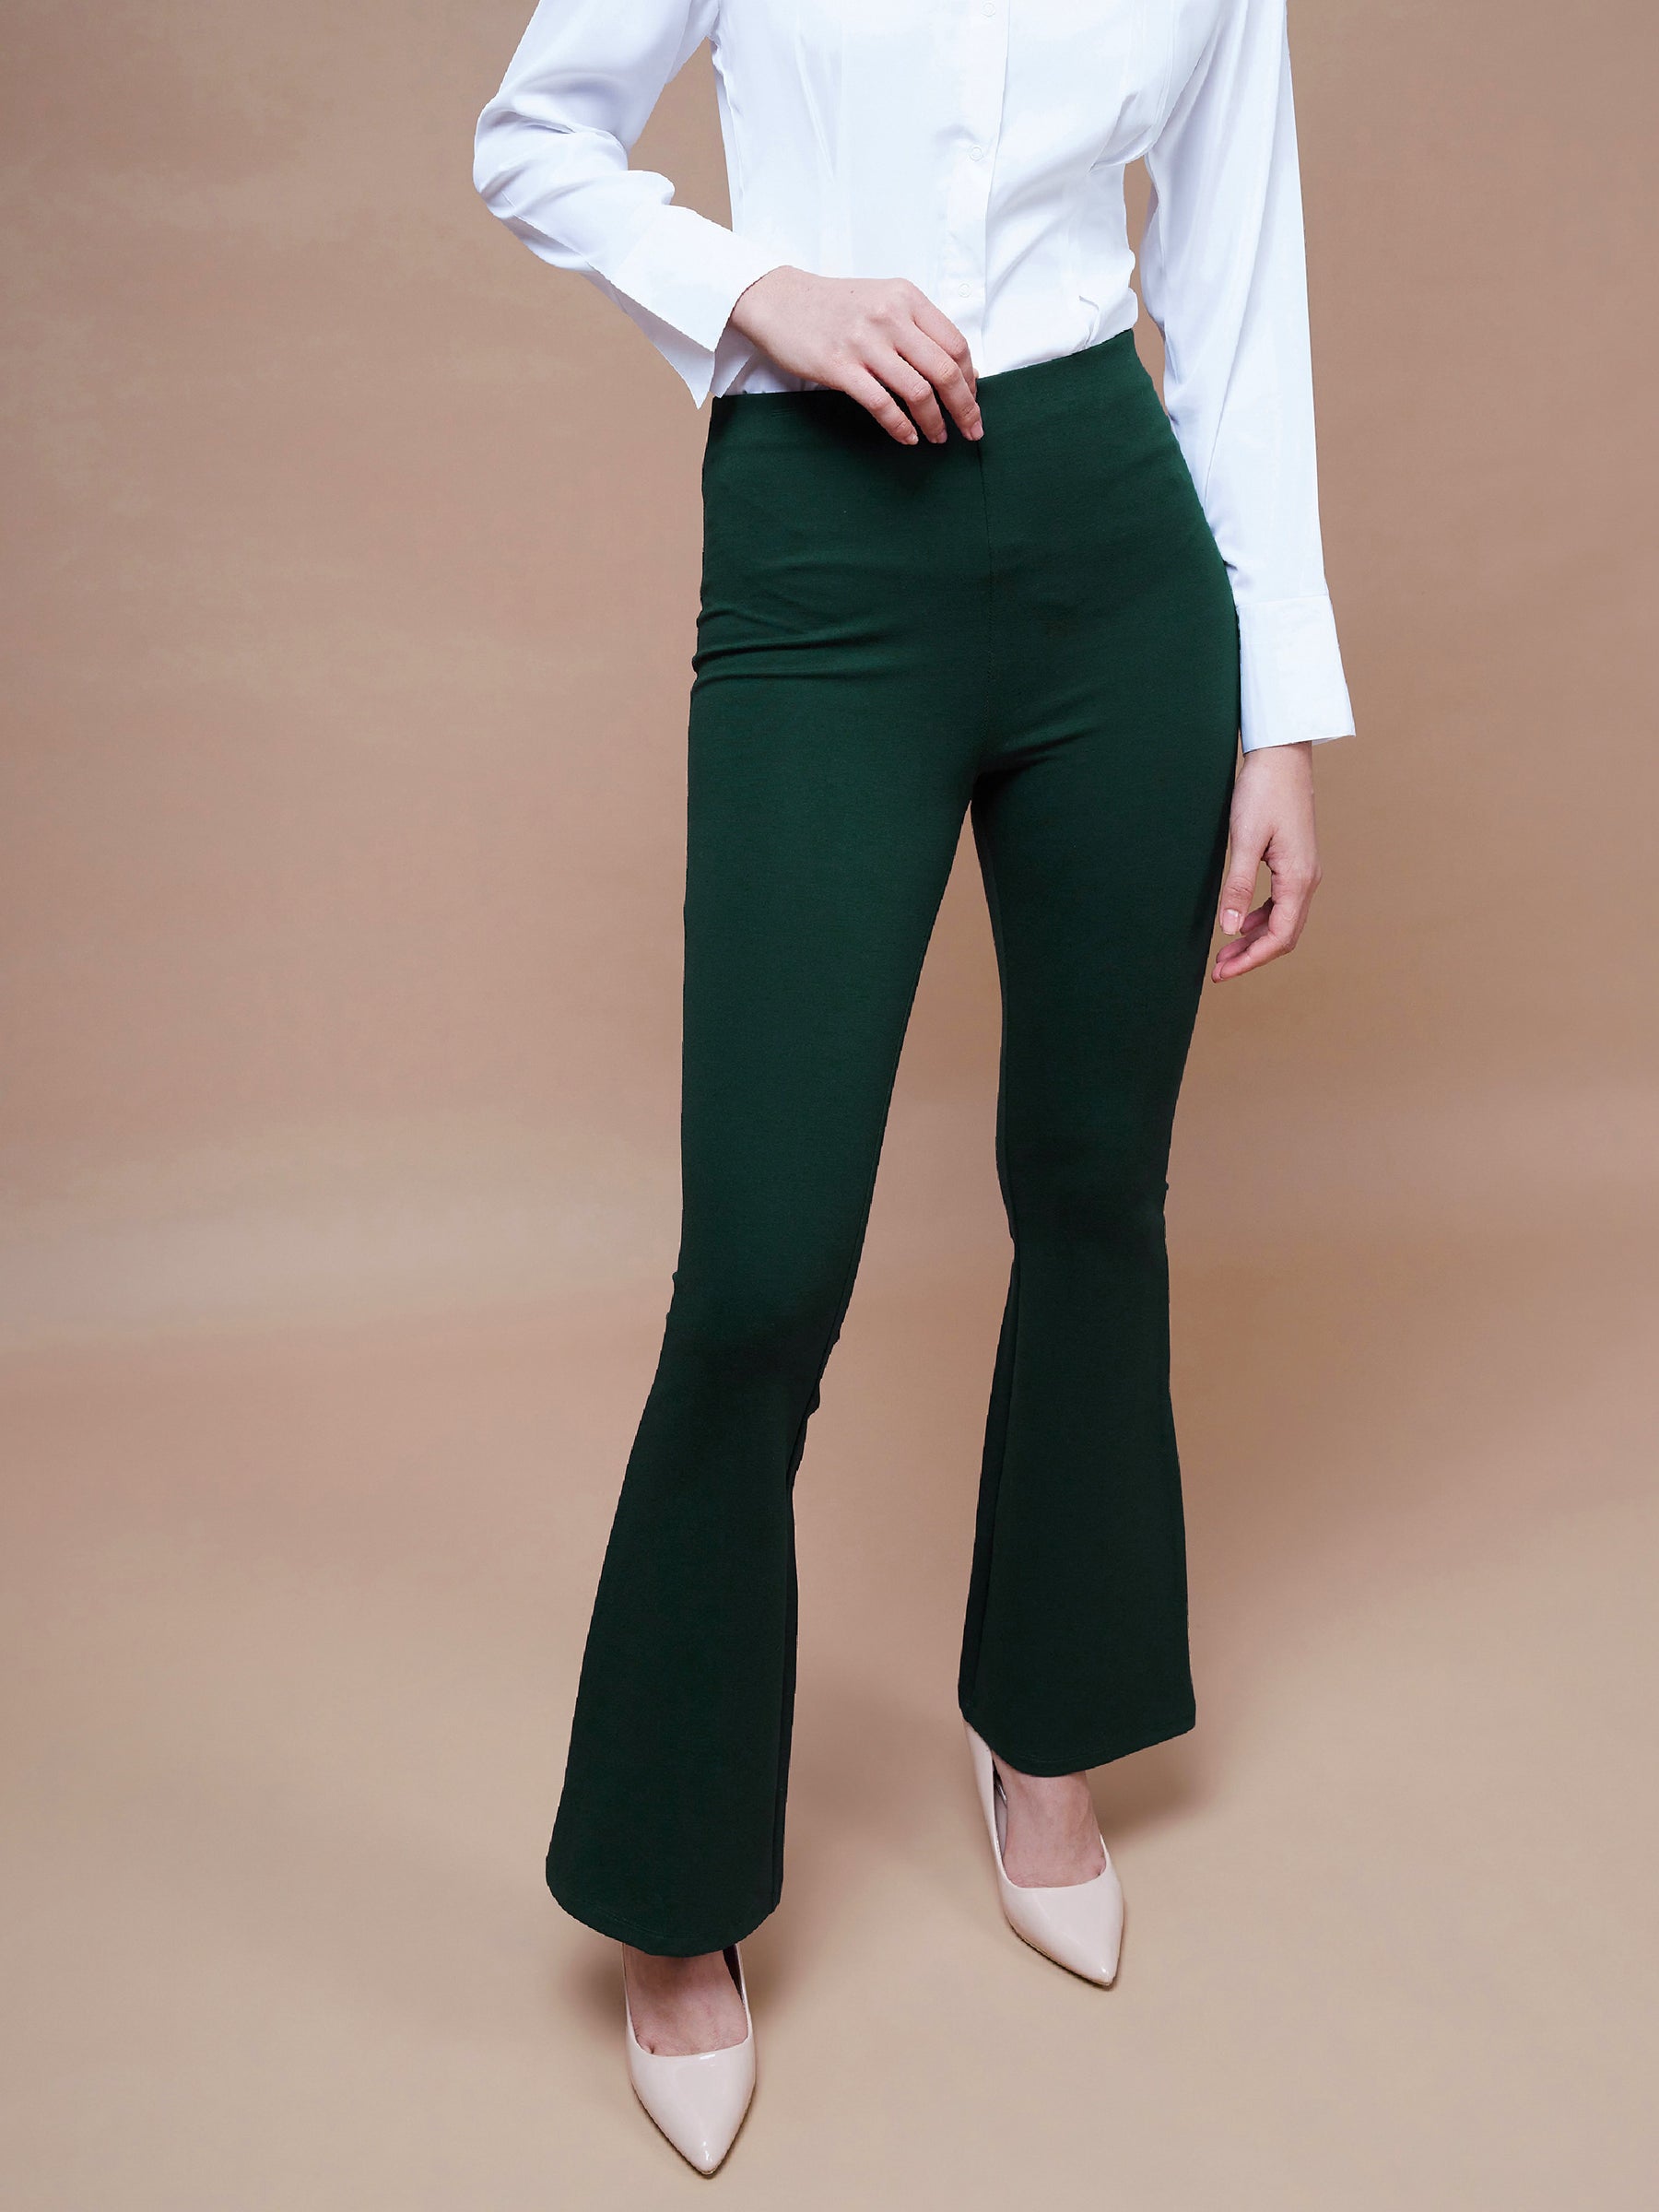 Ladies Bell Bottom Jeans Pant in Delhi at best price by Arsh Traders -  Justdial